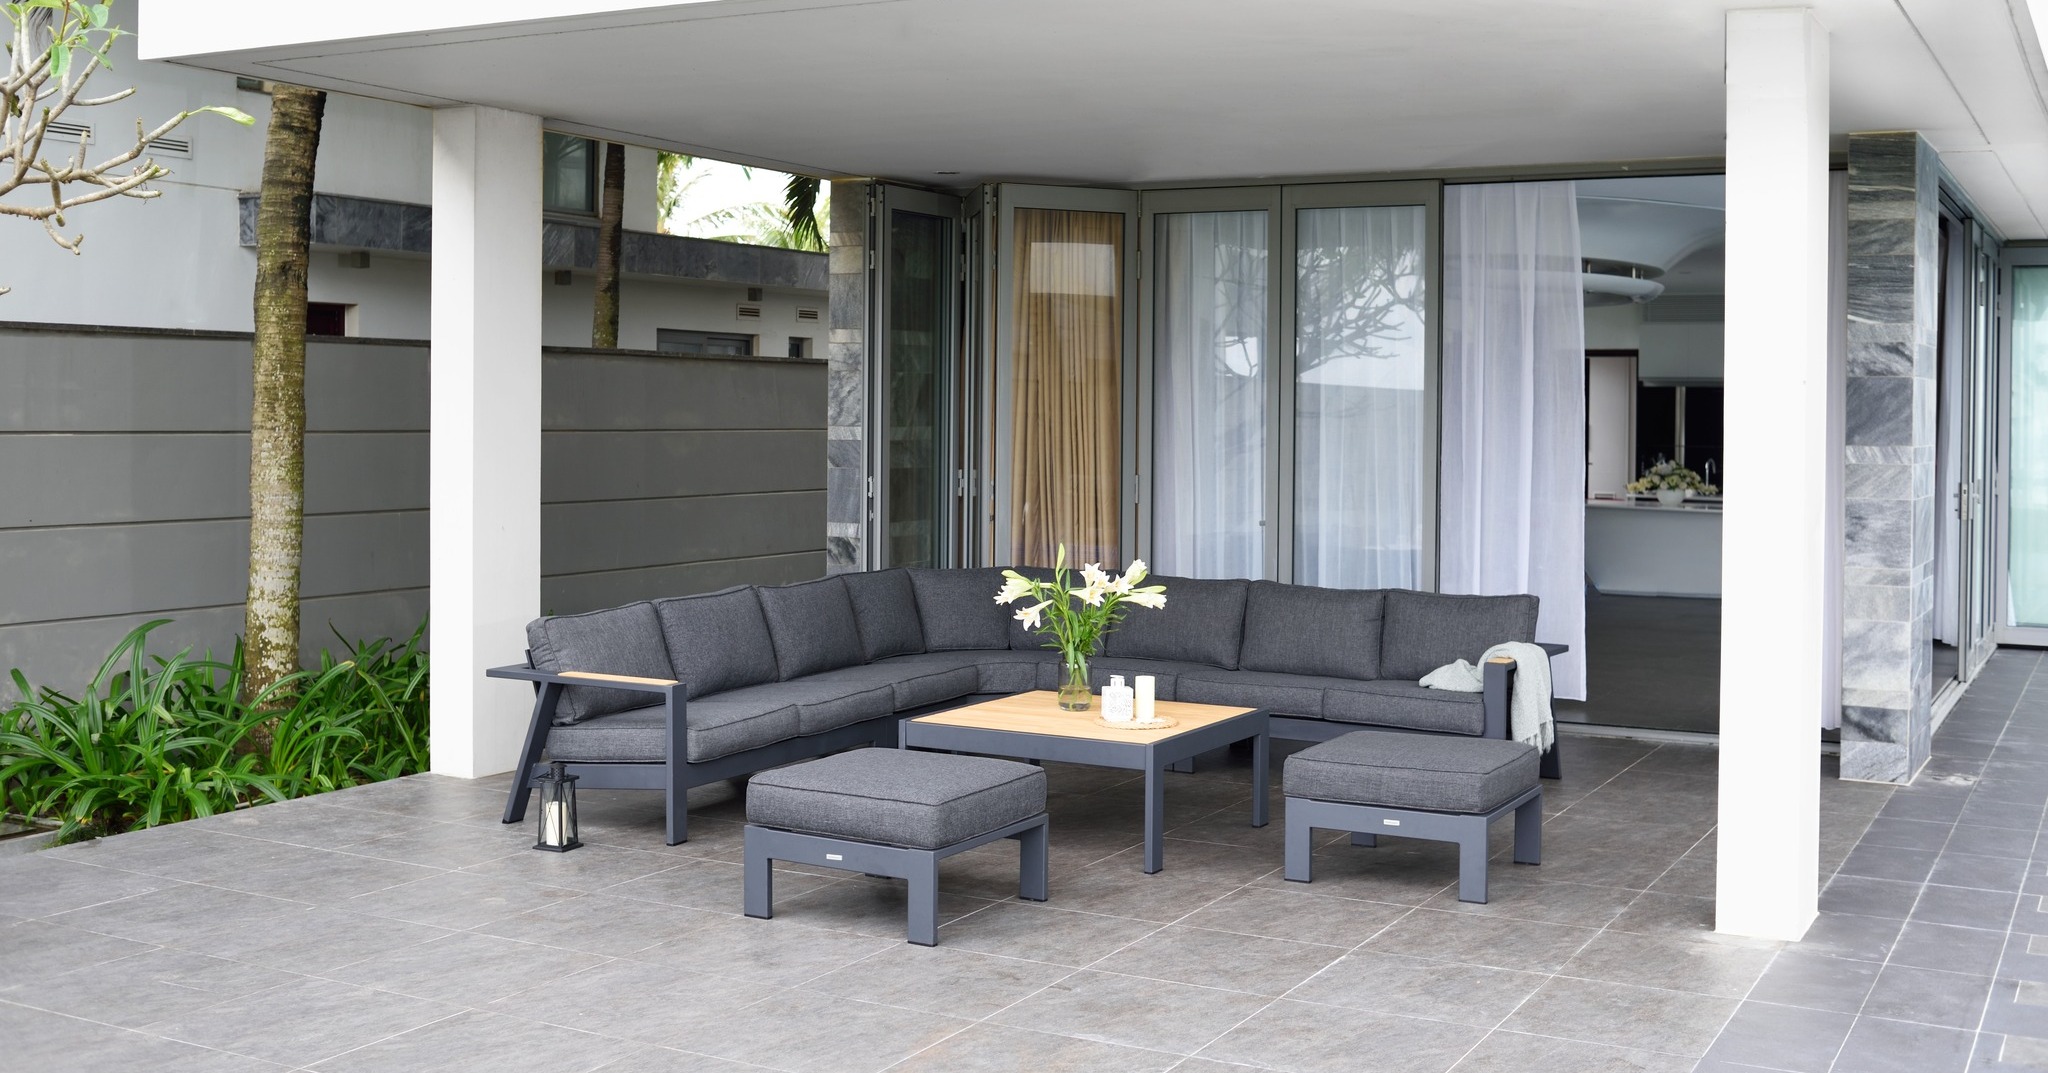 Palau is a range that can entirely transform outdoor or semi-outdoor spaces, bringing a lush, relaxing vibe to any occas... » Outdoor Furniture Fuengirola, Costa Del Sol, Spain